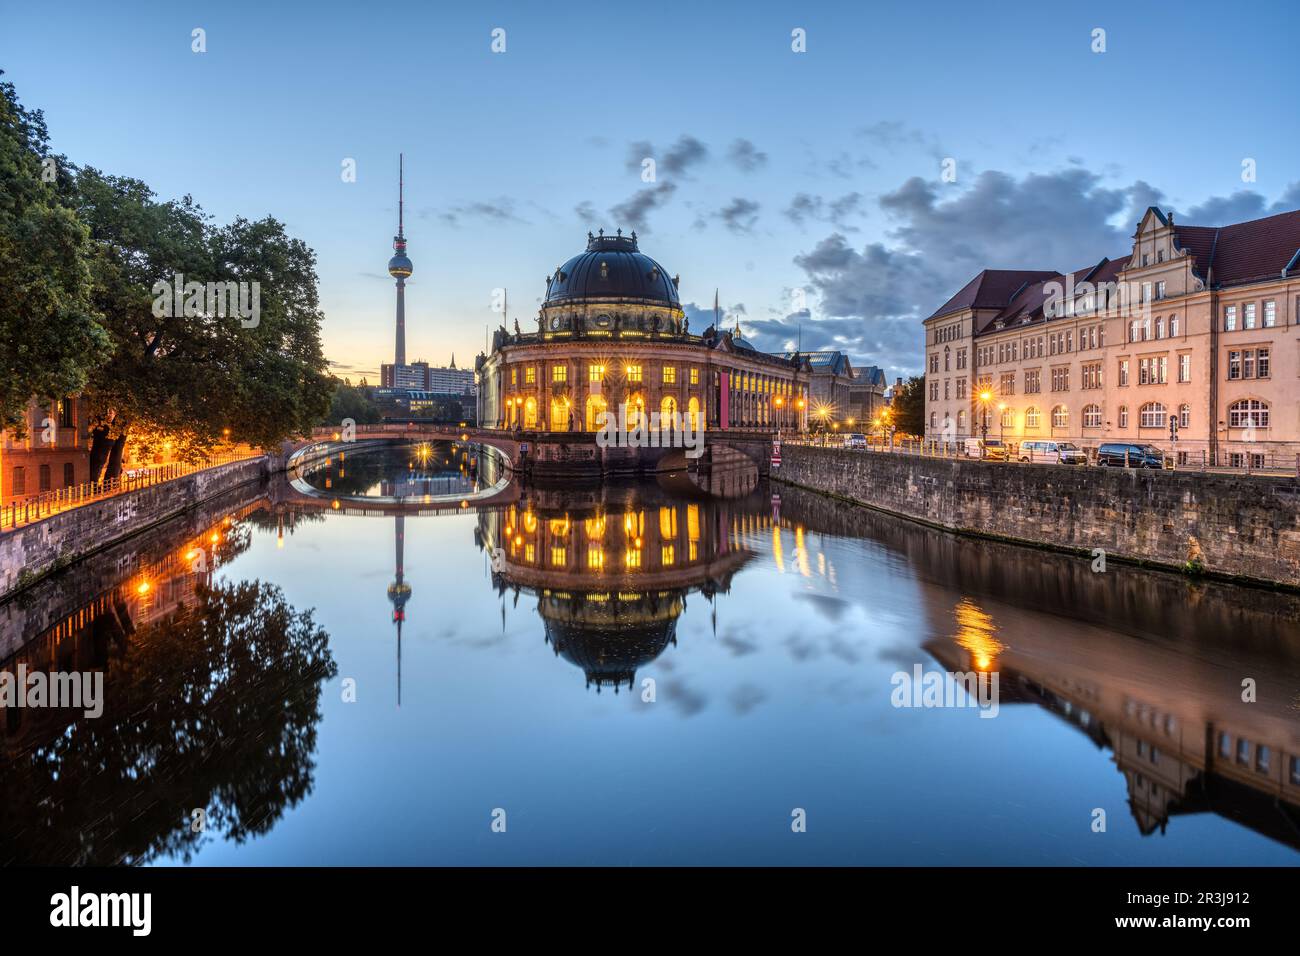 The Bode-Museum and the Television Tower reflected in the river Spree in Berlin before sunrise Stock Photo